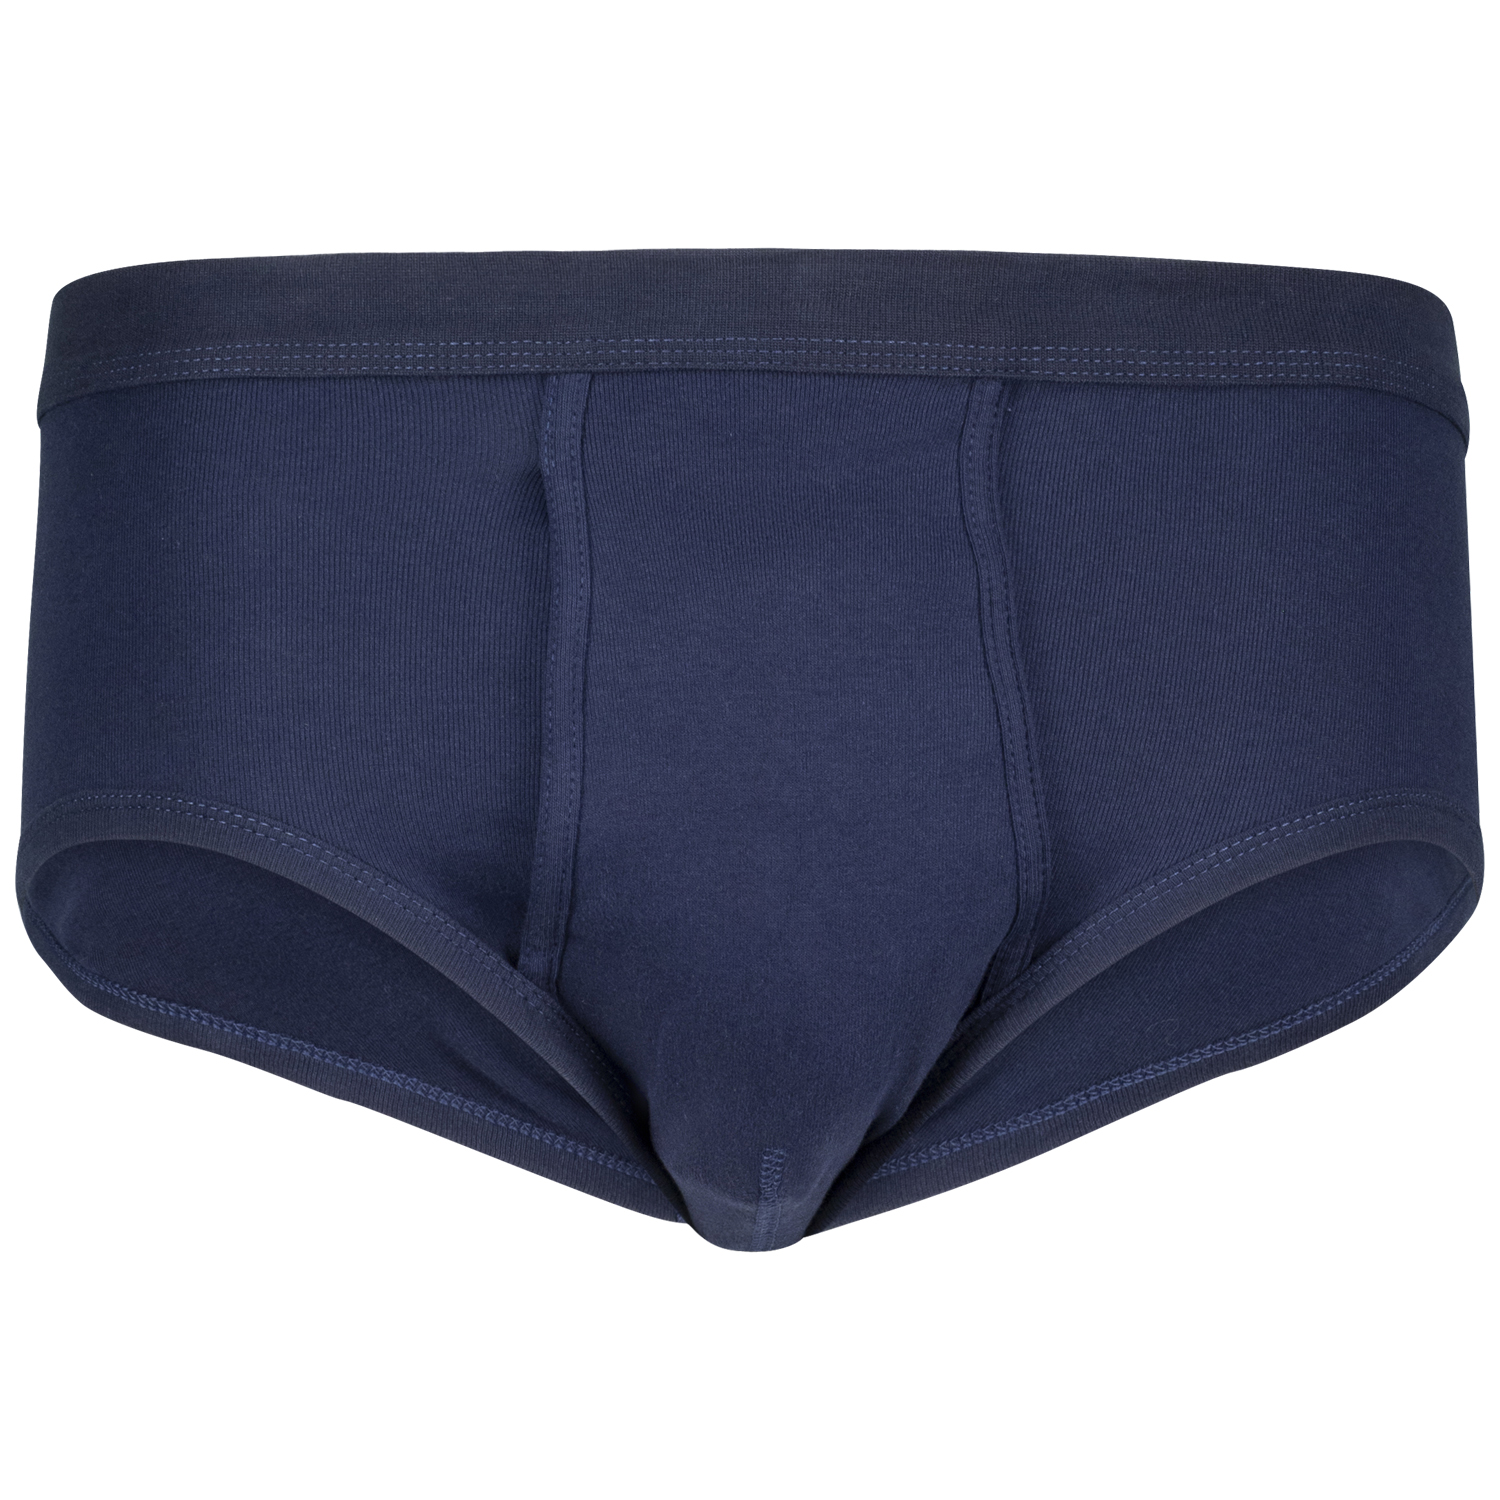 Slip ROYAL with fly in double rib navy by ADAMO until oversize 20